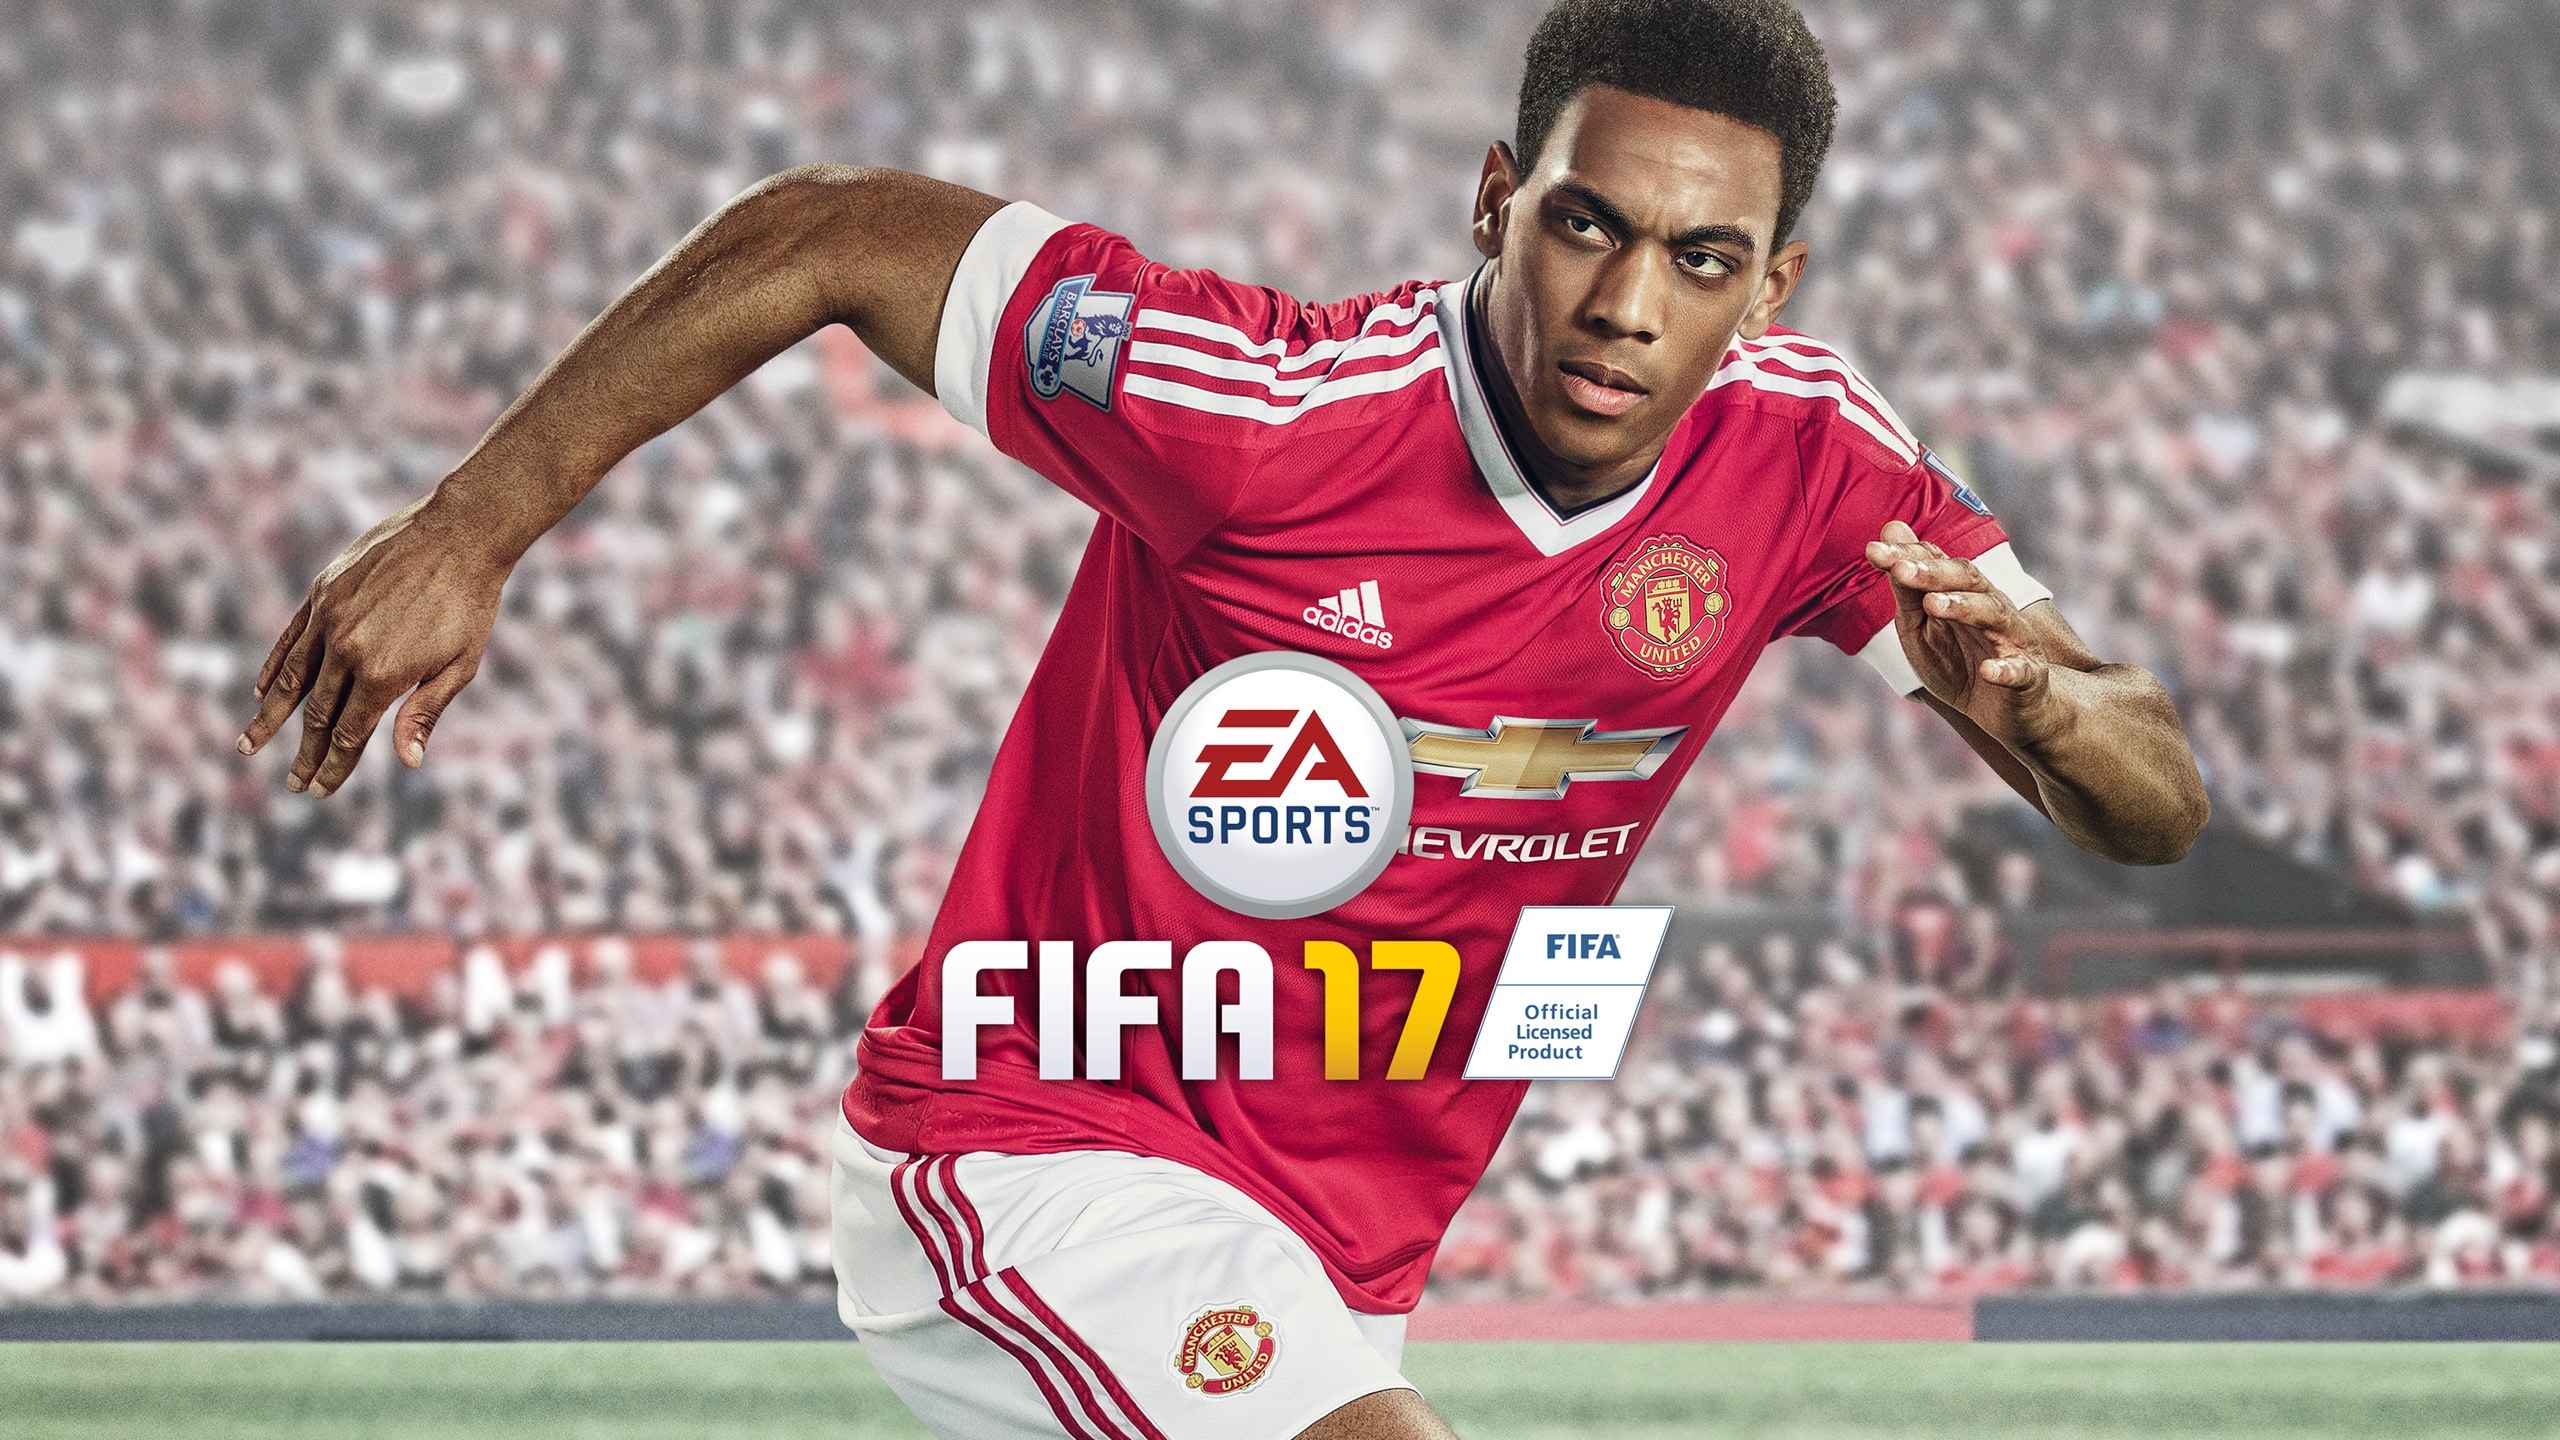 Fifa 17 Latest Ps4 Version Free Download 19